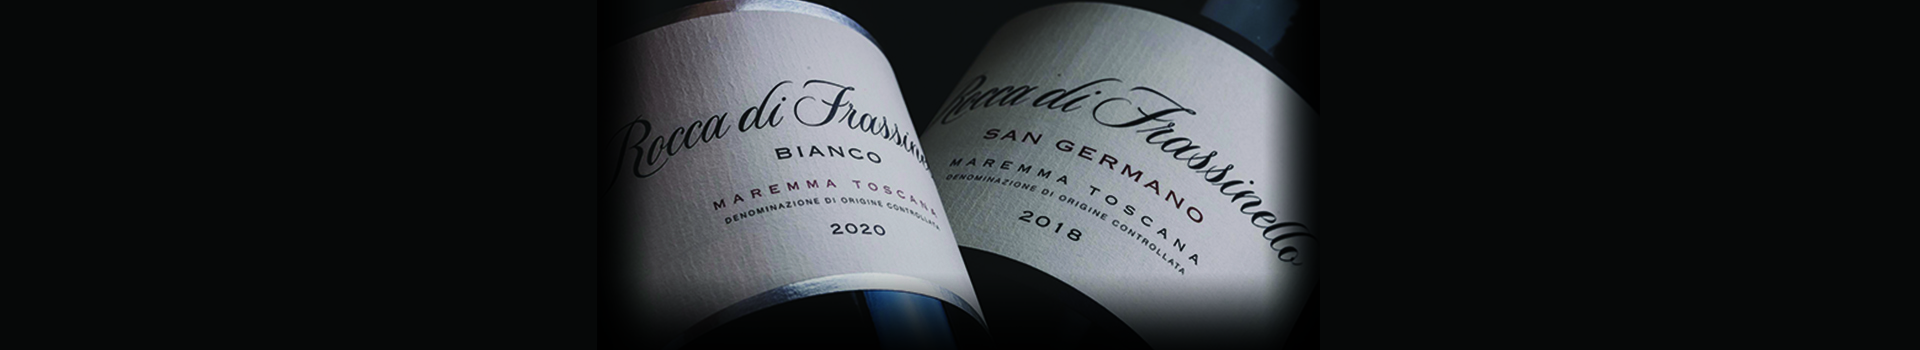 ROCCA DI FRASSINELLO BIANCO AND SAN GERMANOTWO NEW TOP WINES RELEASED AT 54TH VINITALY